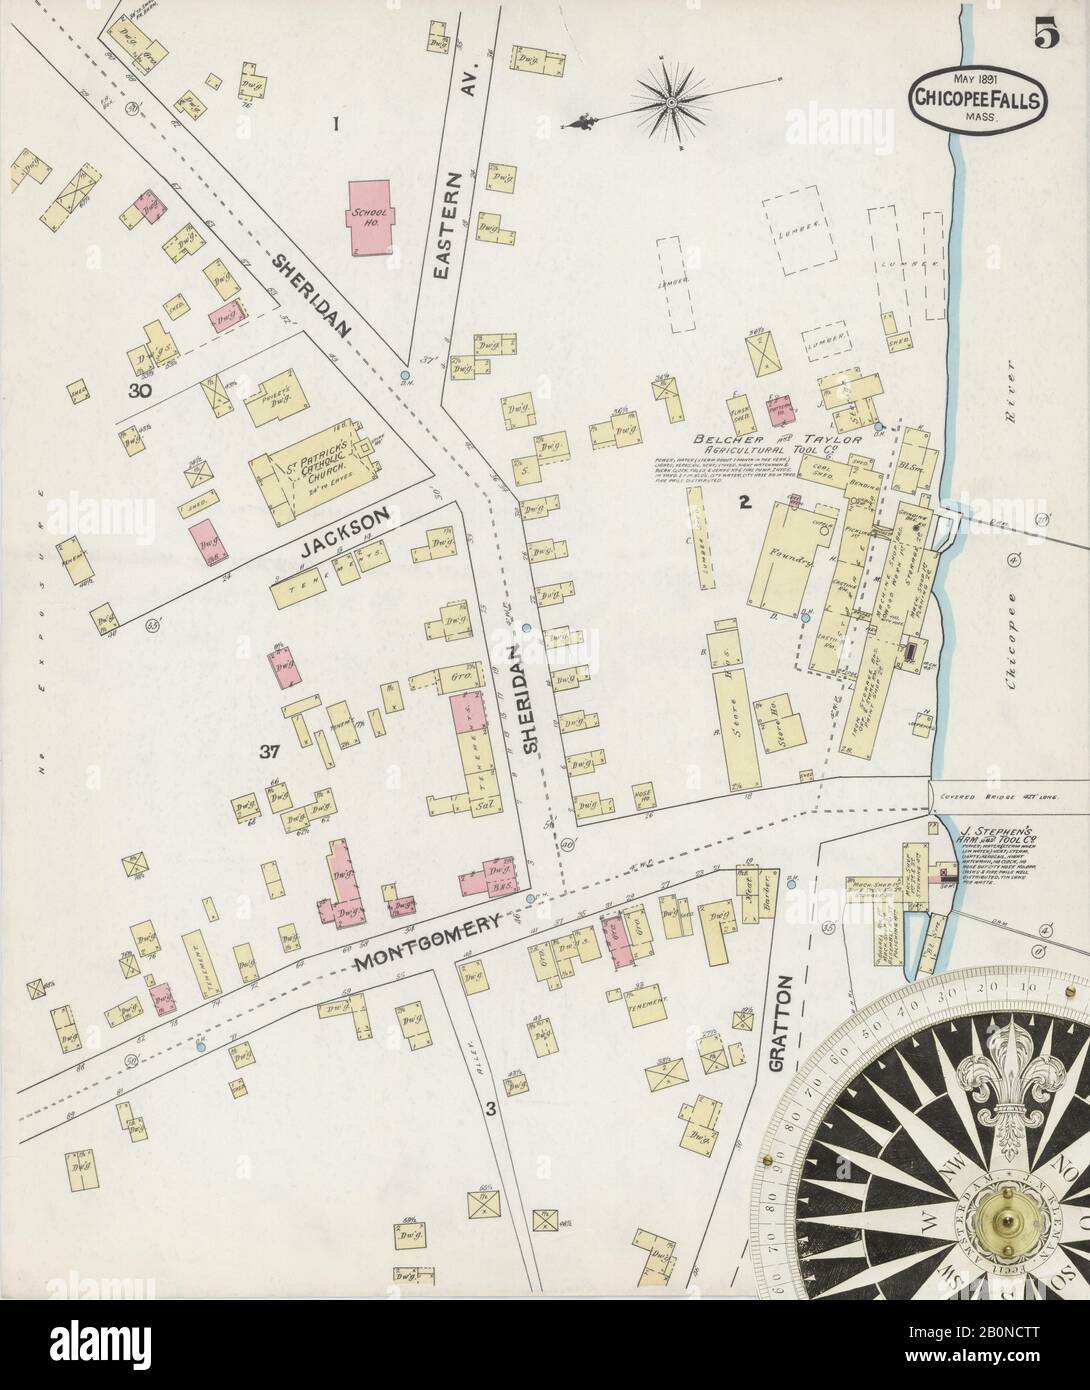 Image 5 of Sanborn Fire Insurance Map from Chicopee Falls, Hampden County, Massachusetts. May 1891. 5 Sheet(s), America, street map with a Nineteenth Century compass Stock Photo